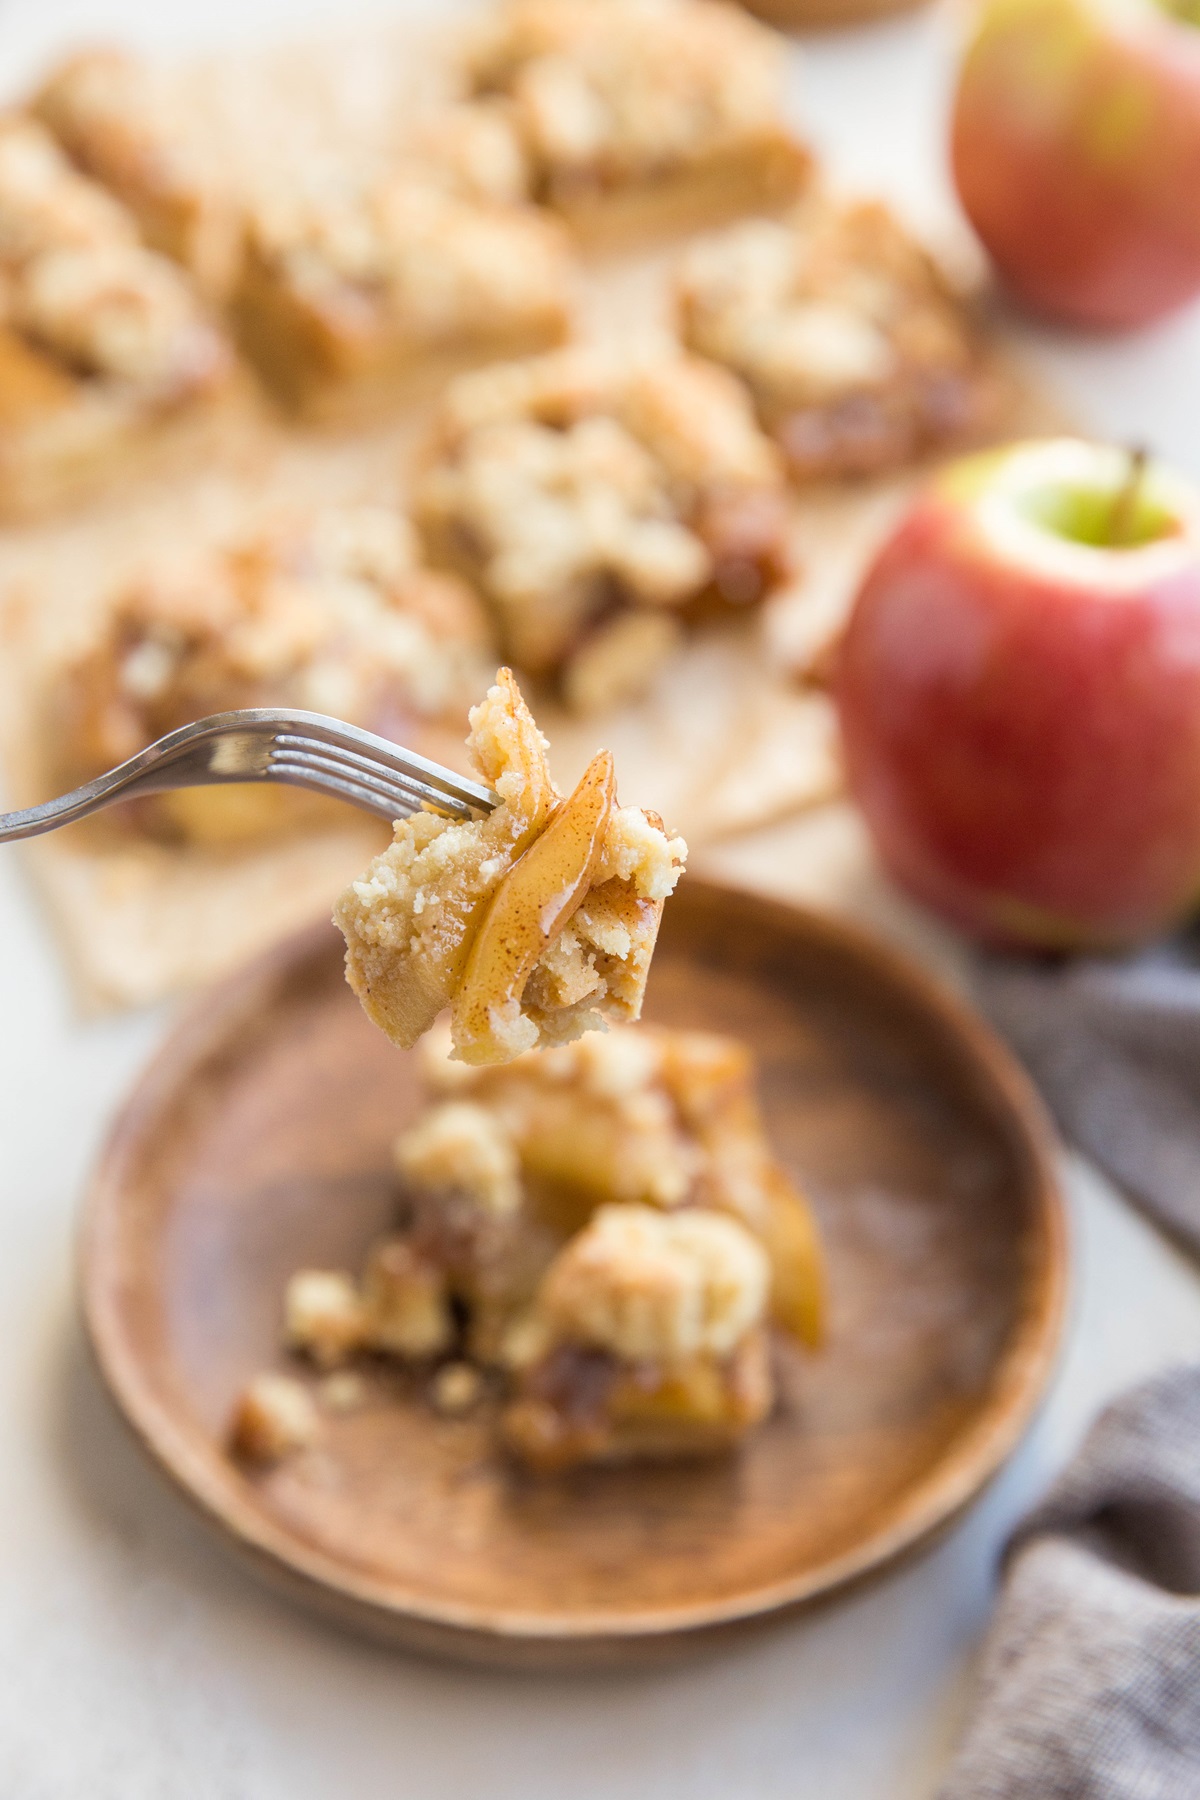 Paleo Apple Crumb Bars made with almond flour. 6 ingredients, paleo, vegan, gluten-free, dairy-free and healthy